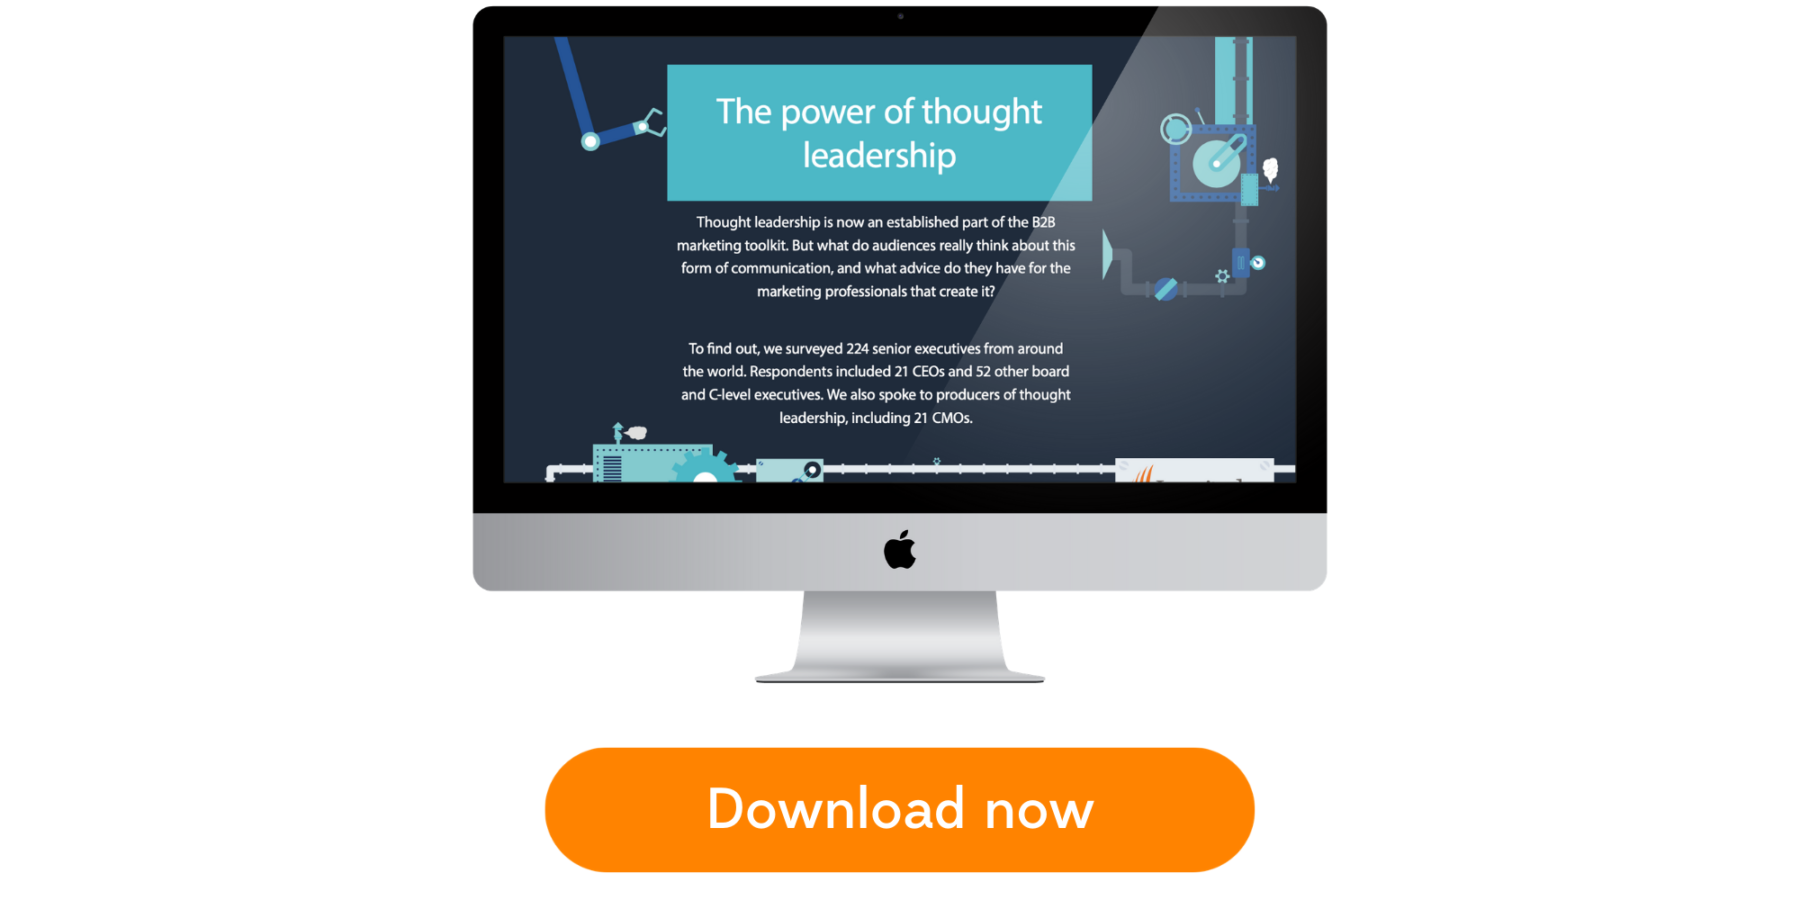 Find out what audiences really think of thought leadership